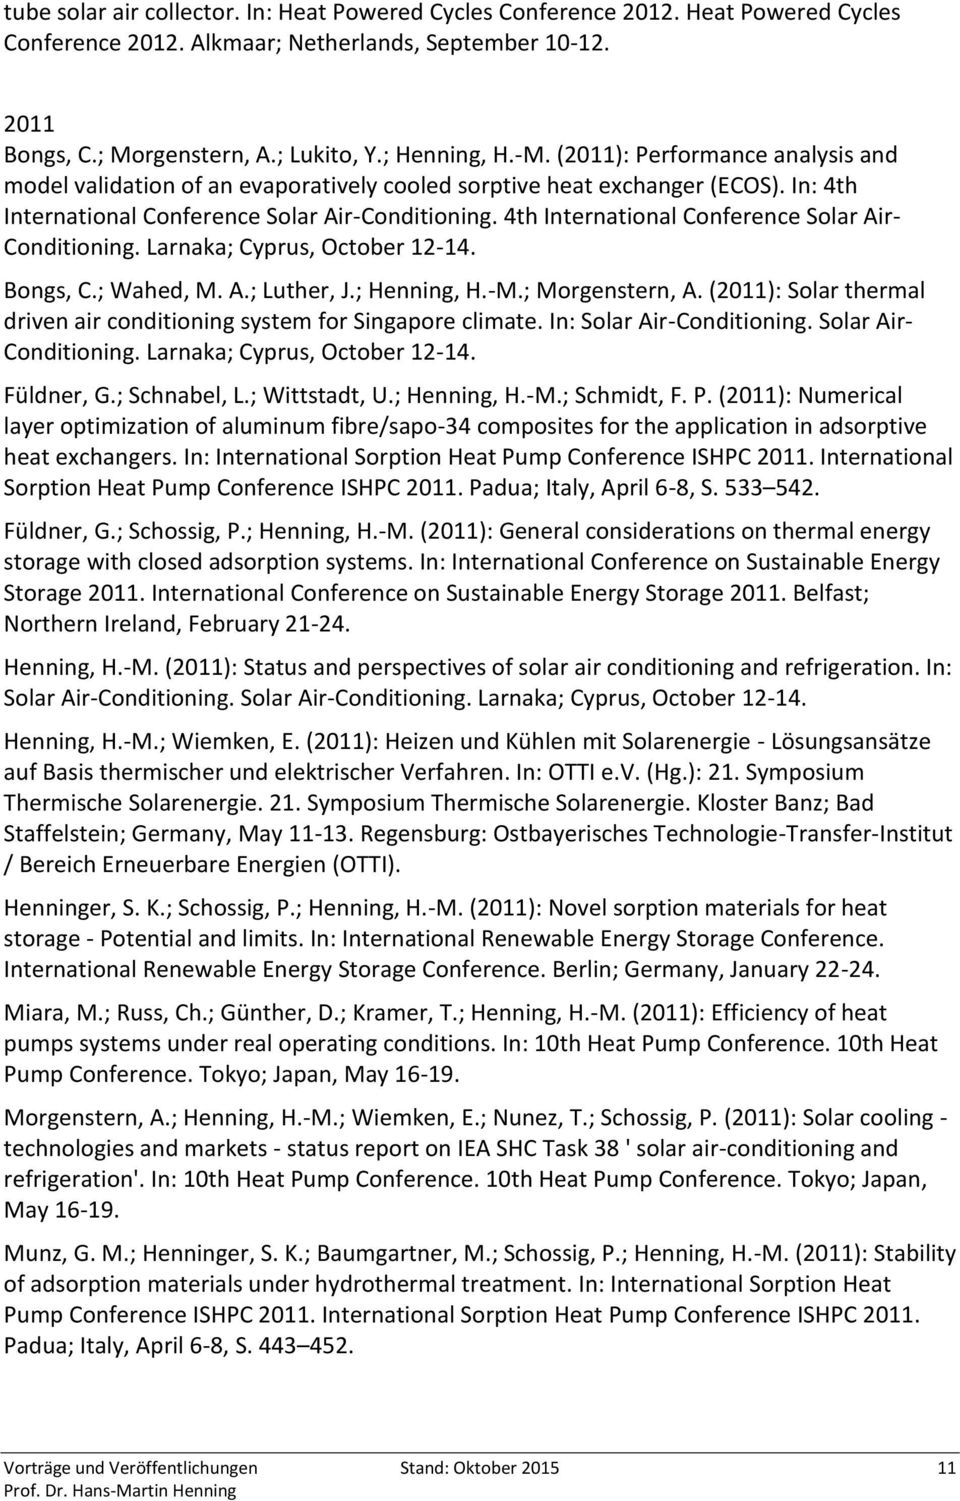 4th International Conference Solar Air- Conditioning. Larnaka; Cyprus, October 12-14. Bongs, C.; Wahed, M. A.; Luther, J.; Henning, H.-M.; Morgenstern, A.